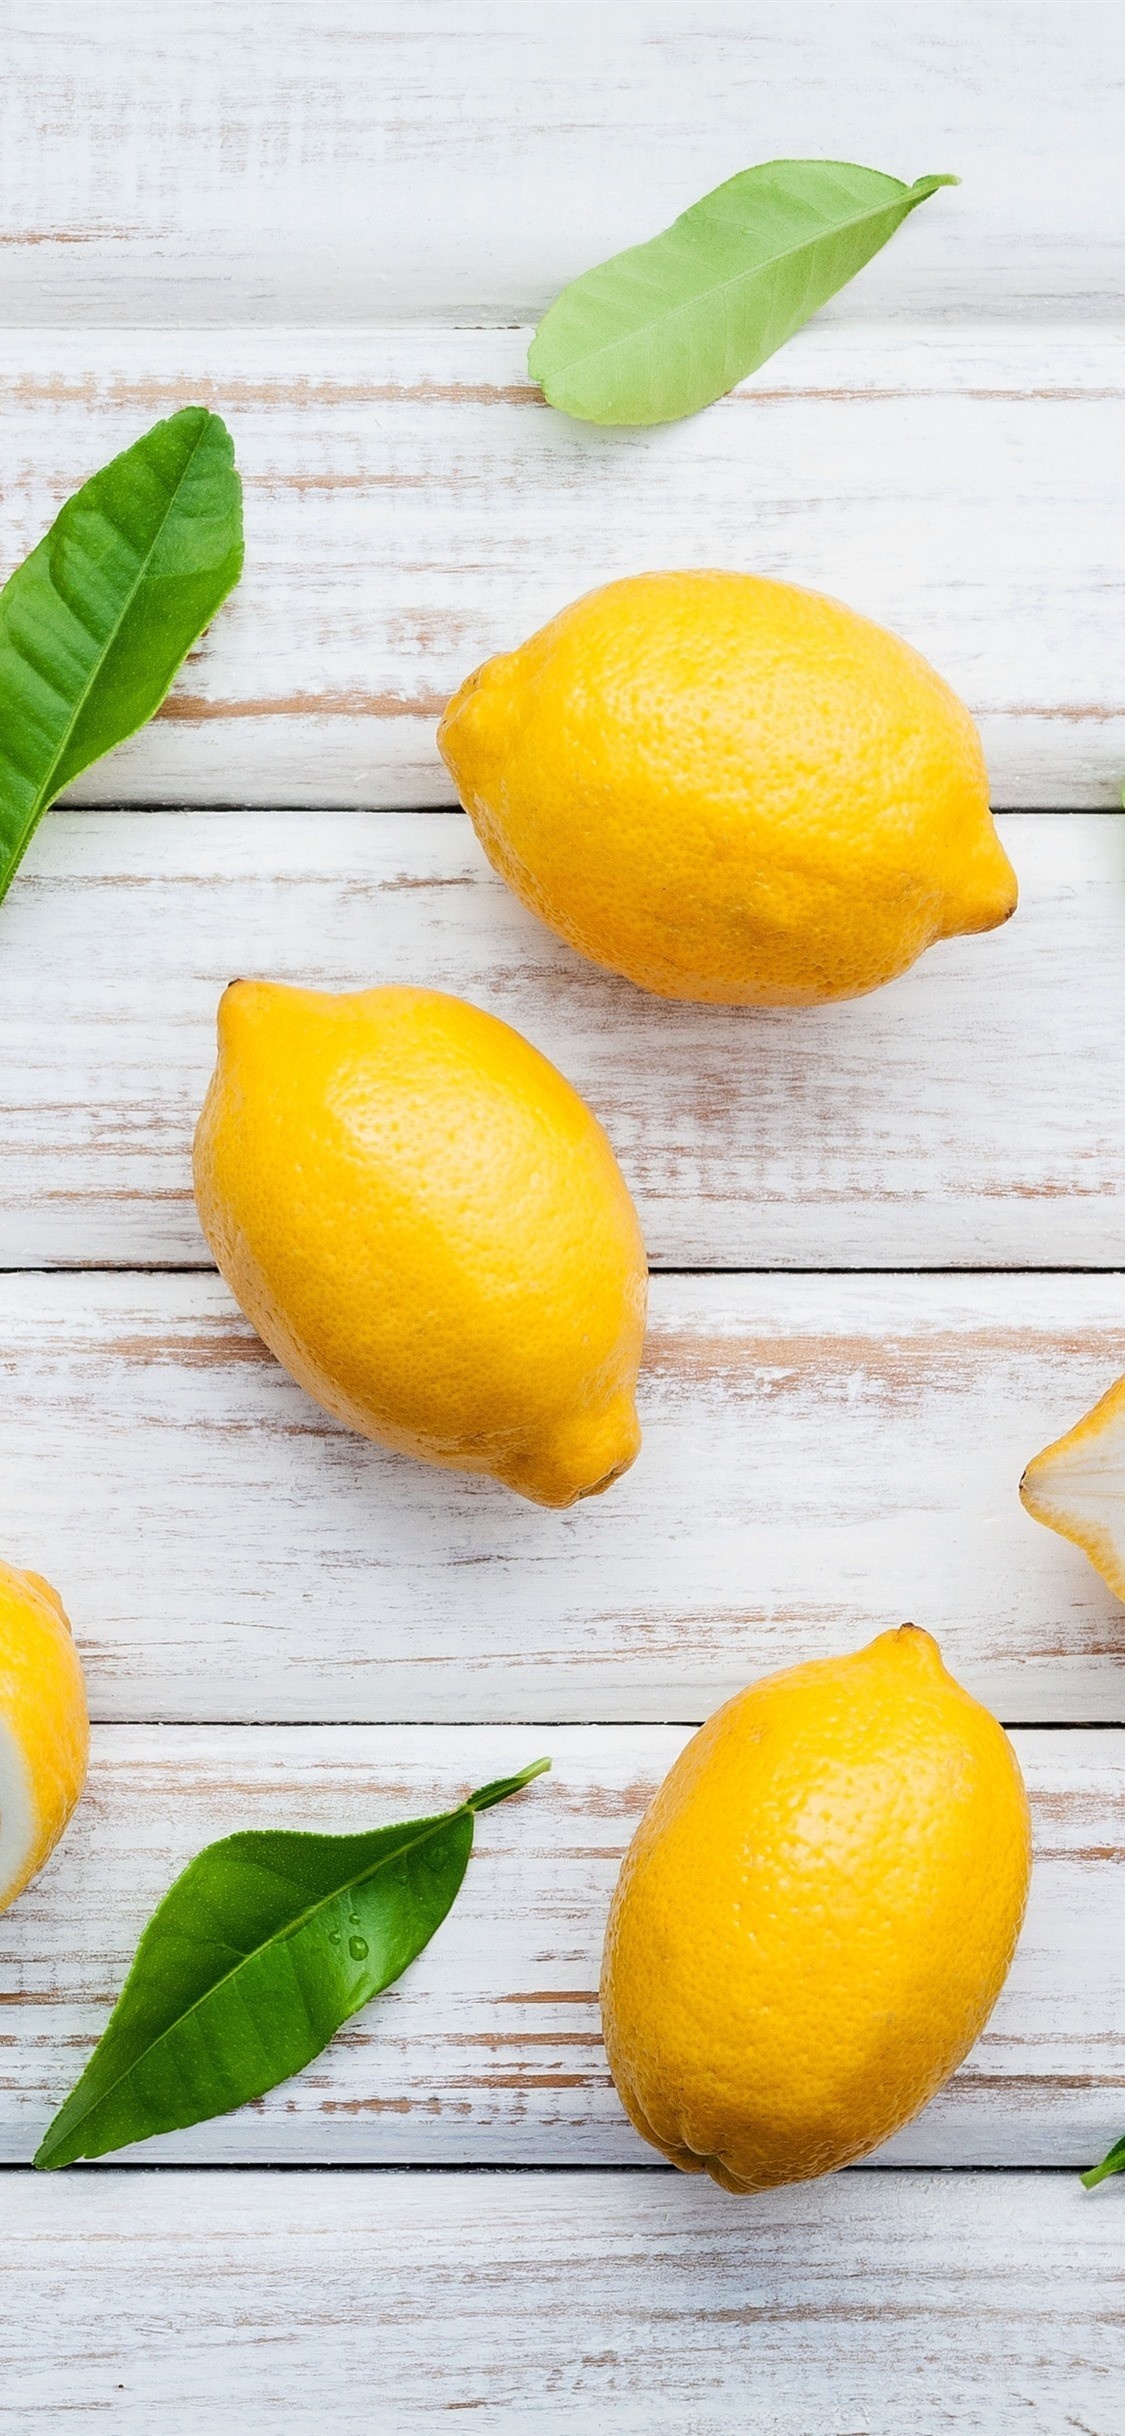 Lemon: Used to enhance poultry, fish, and vegetable dishes worldwide. 1130x2440 HD Wallpaper.